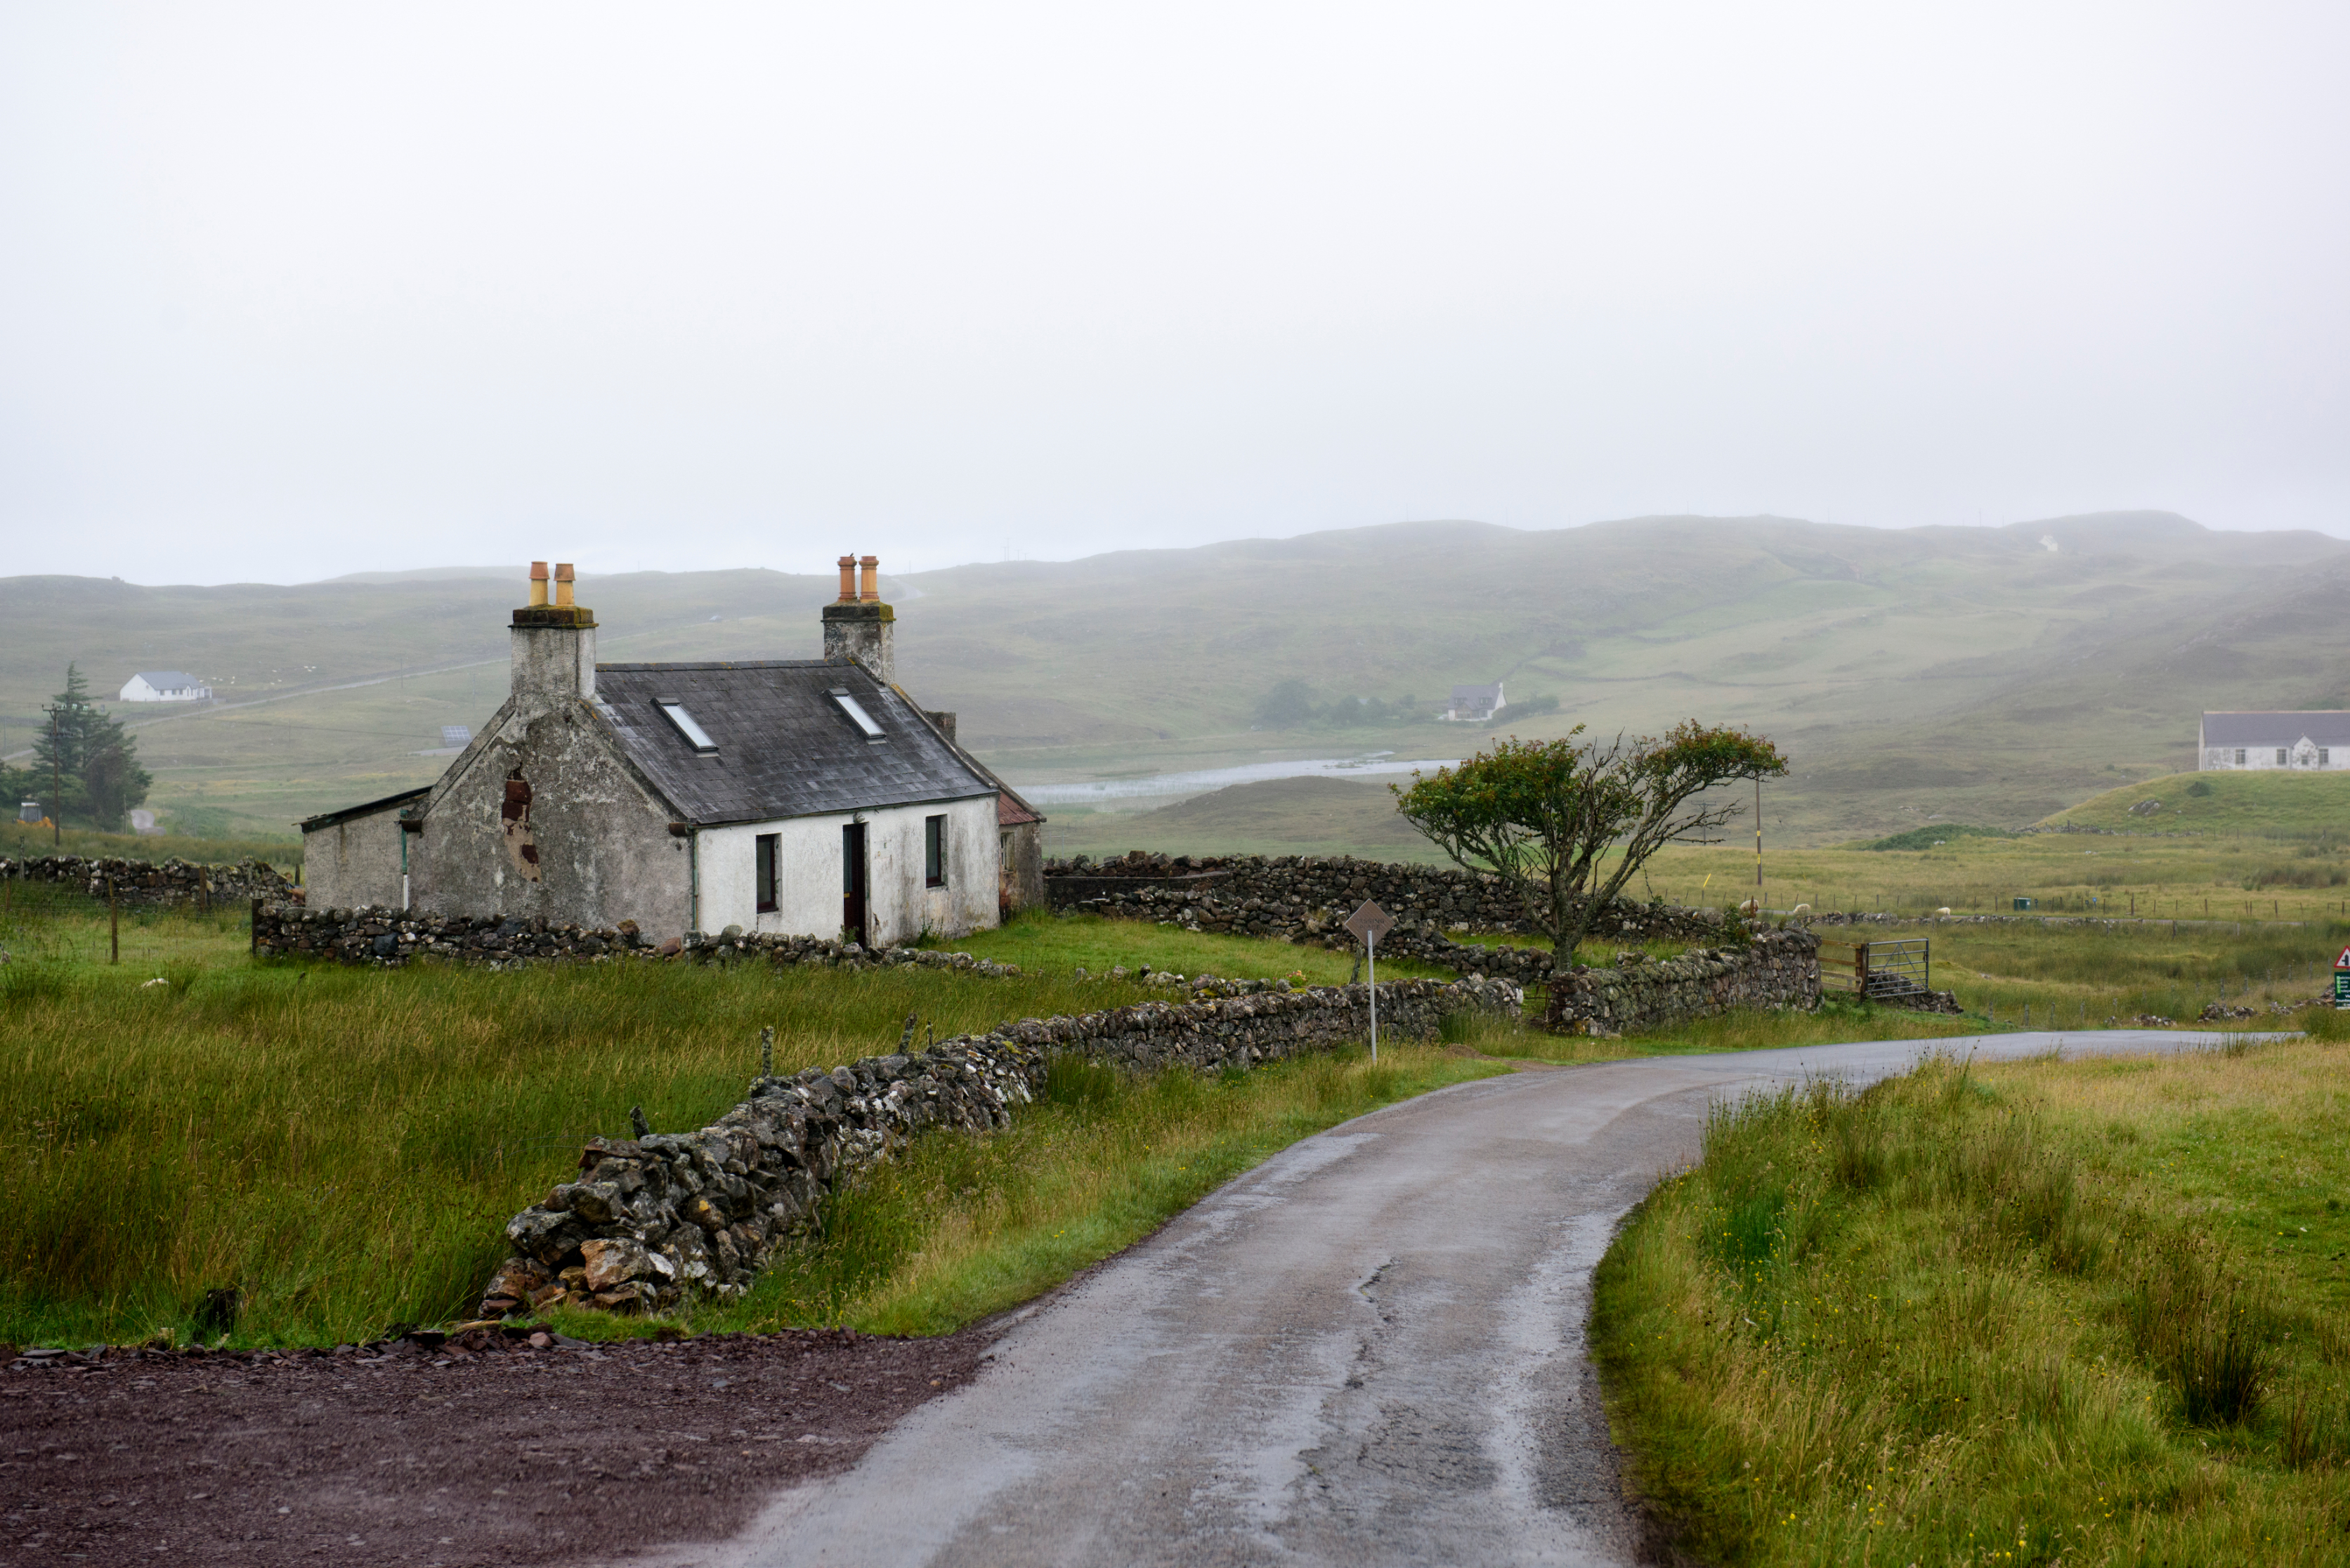 Abandoned white farmhouse with stone walls in the Scottish countryside